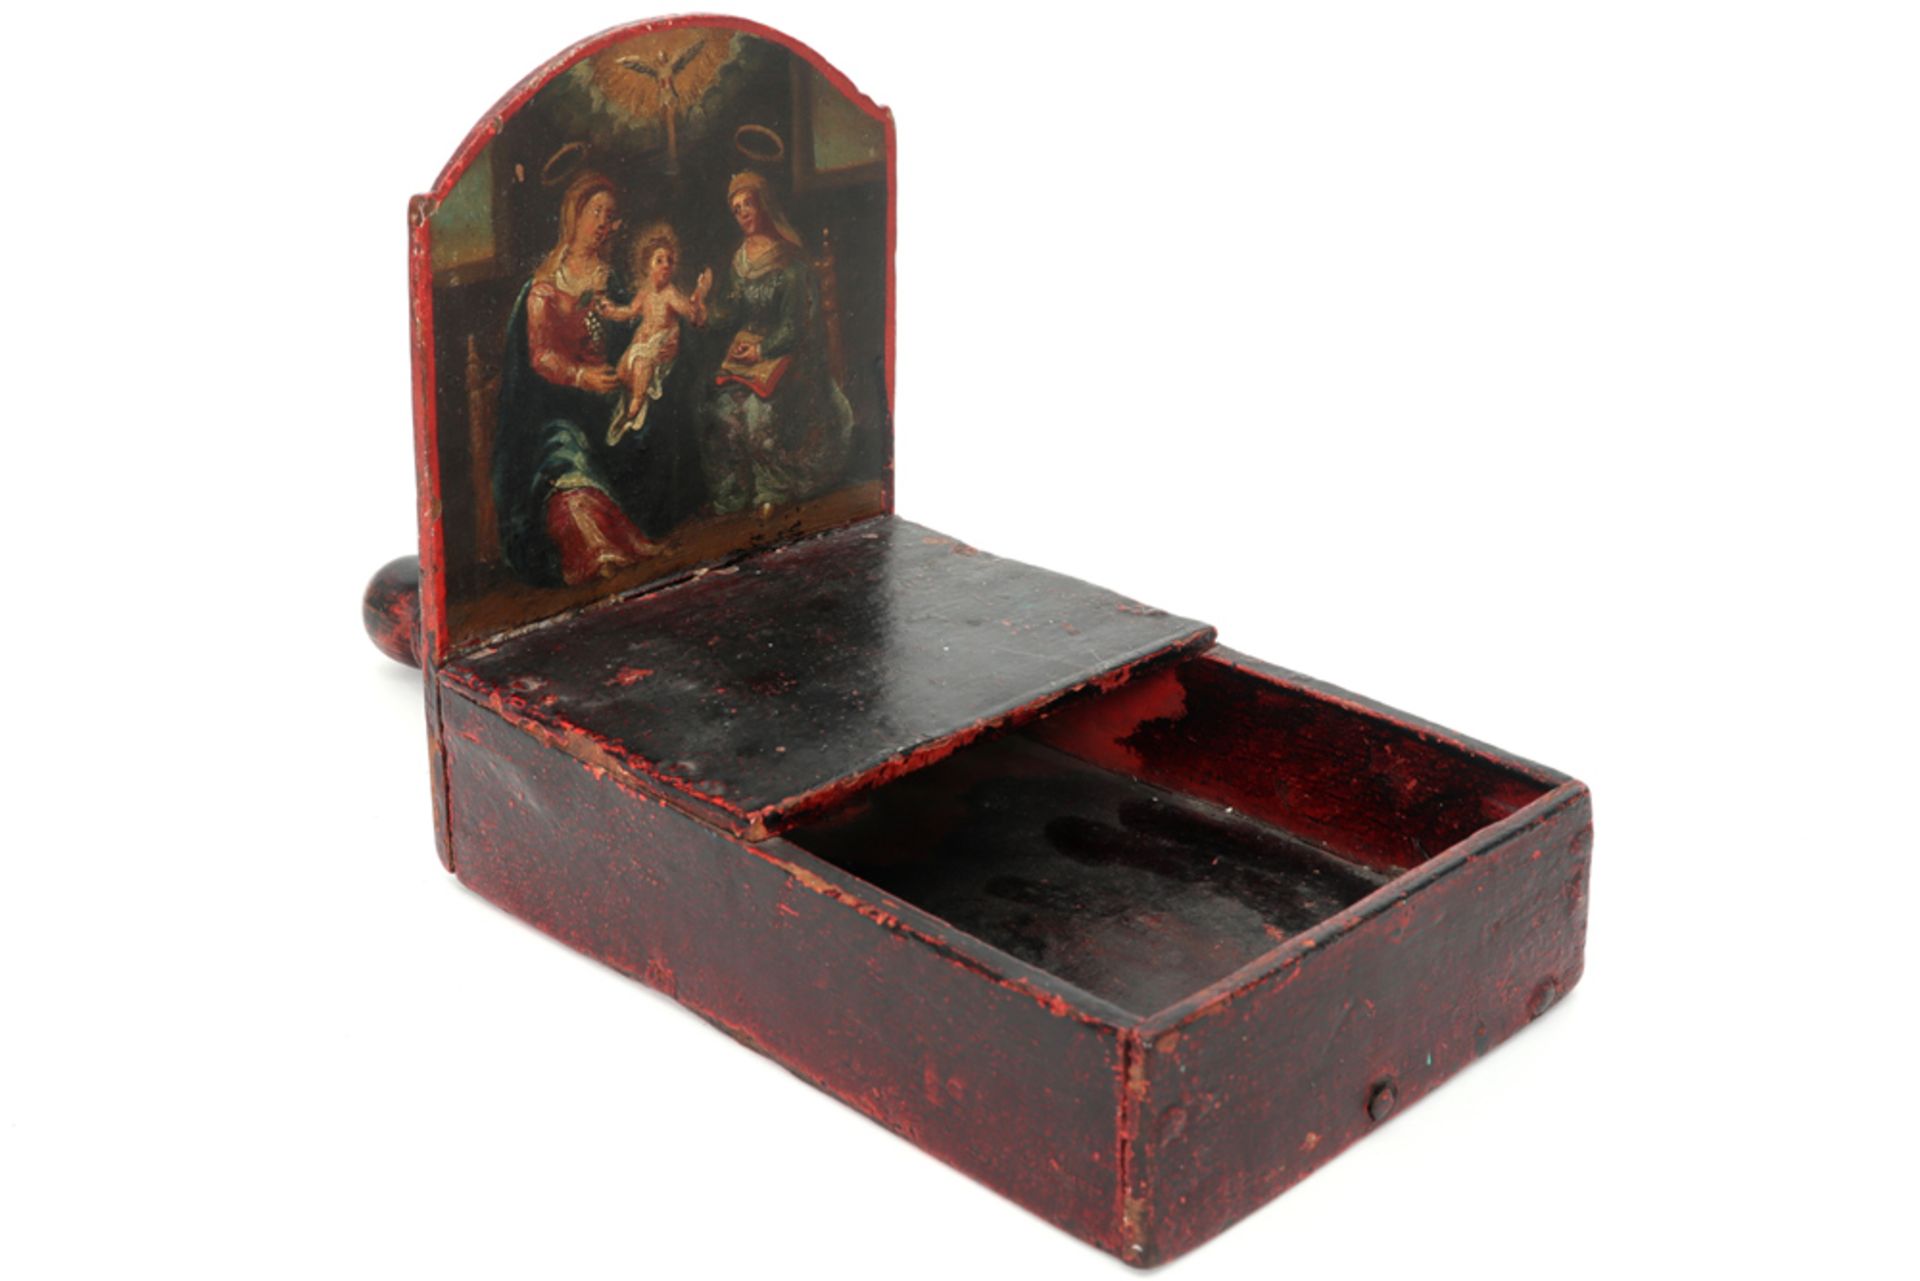 18th Cent. church money-collection box in painted wood with a small painting with a biblical